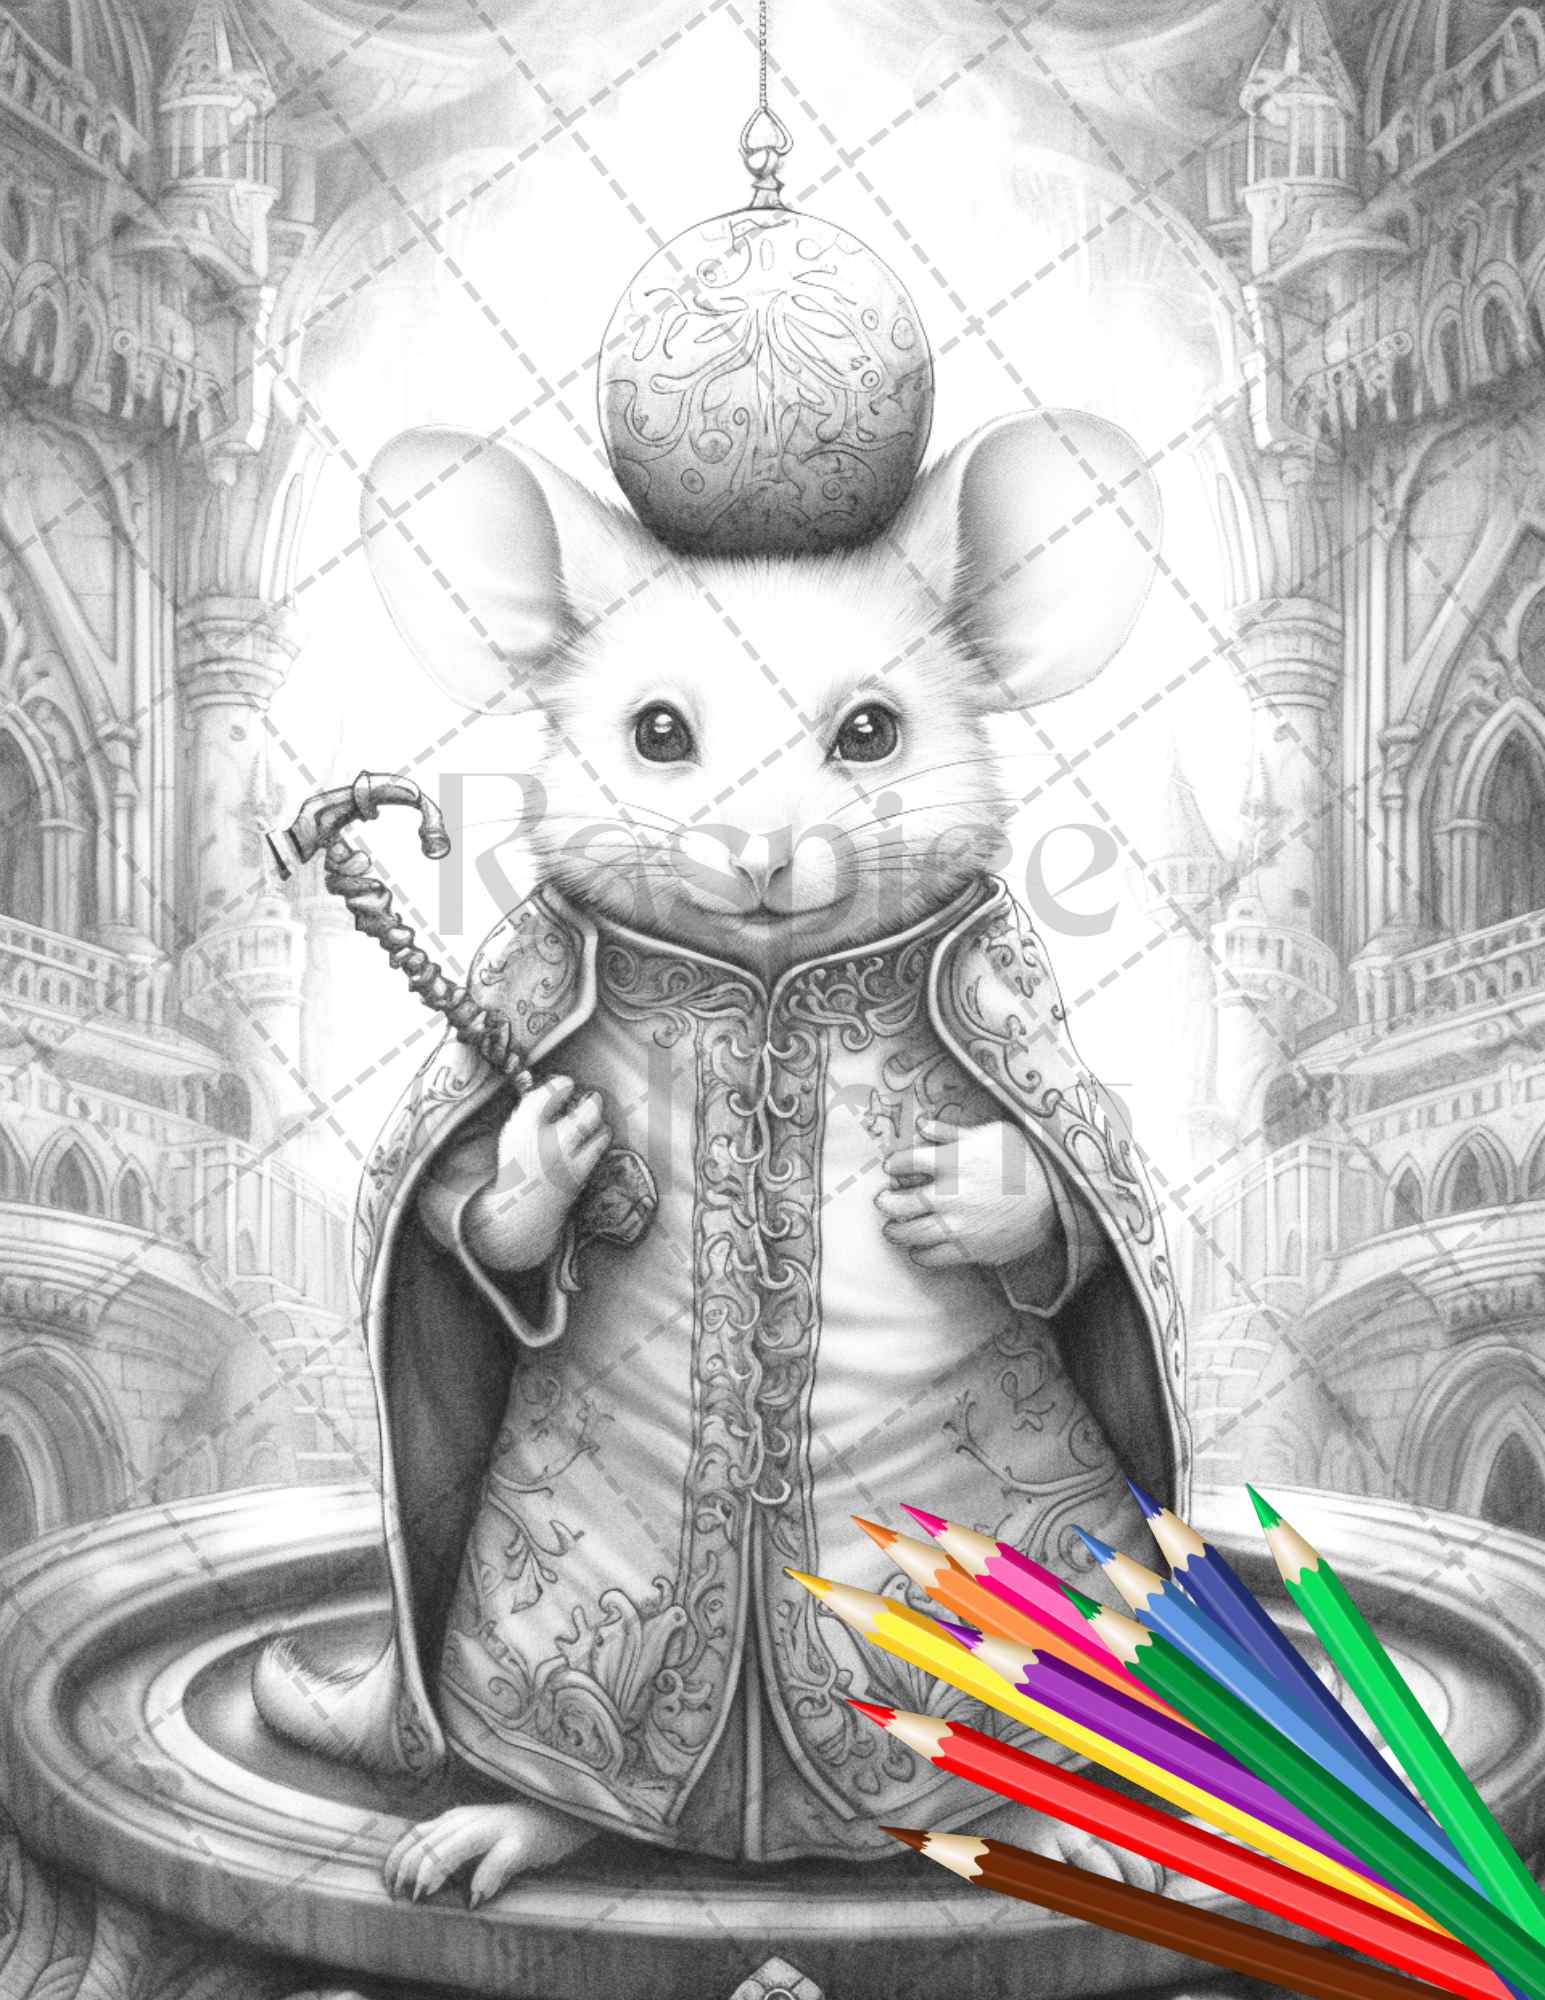 grayscale coloring pages printable, little mouse prince coloring pages, adult coloring art, stress relief grayscale illustrations, intricate grayscale designs, animal coloring pages for adults